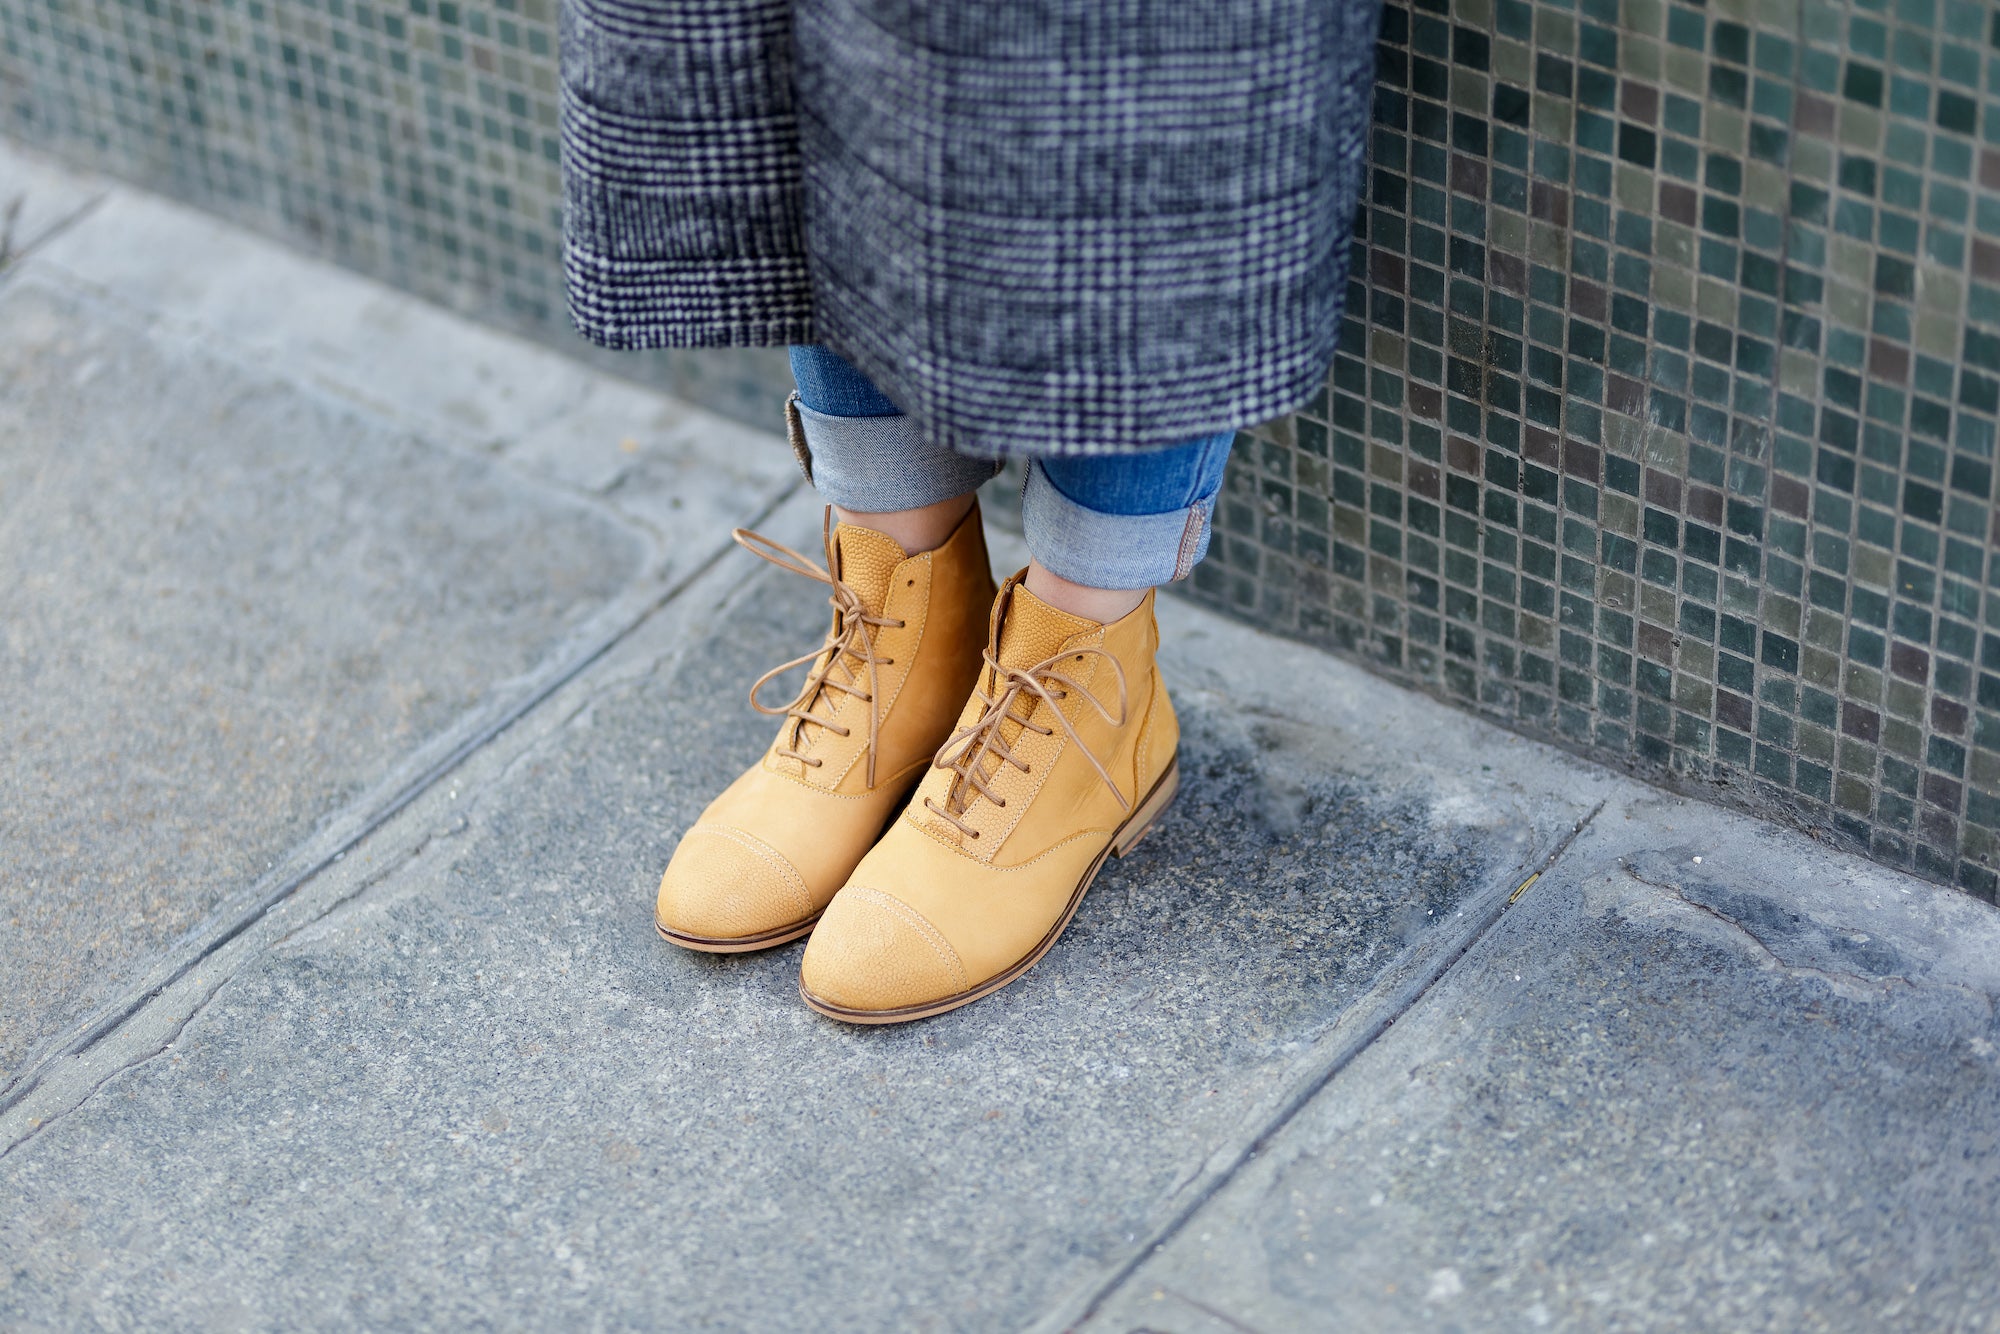 How to wear yellow Swing boots